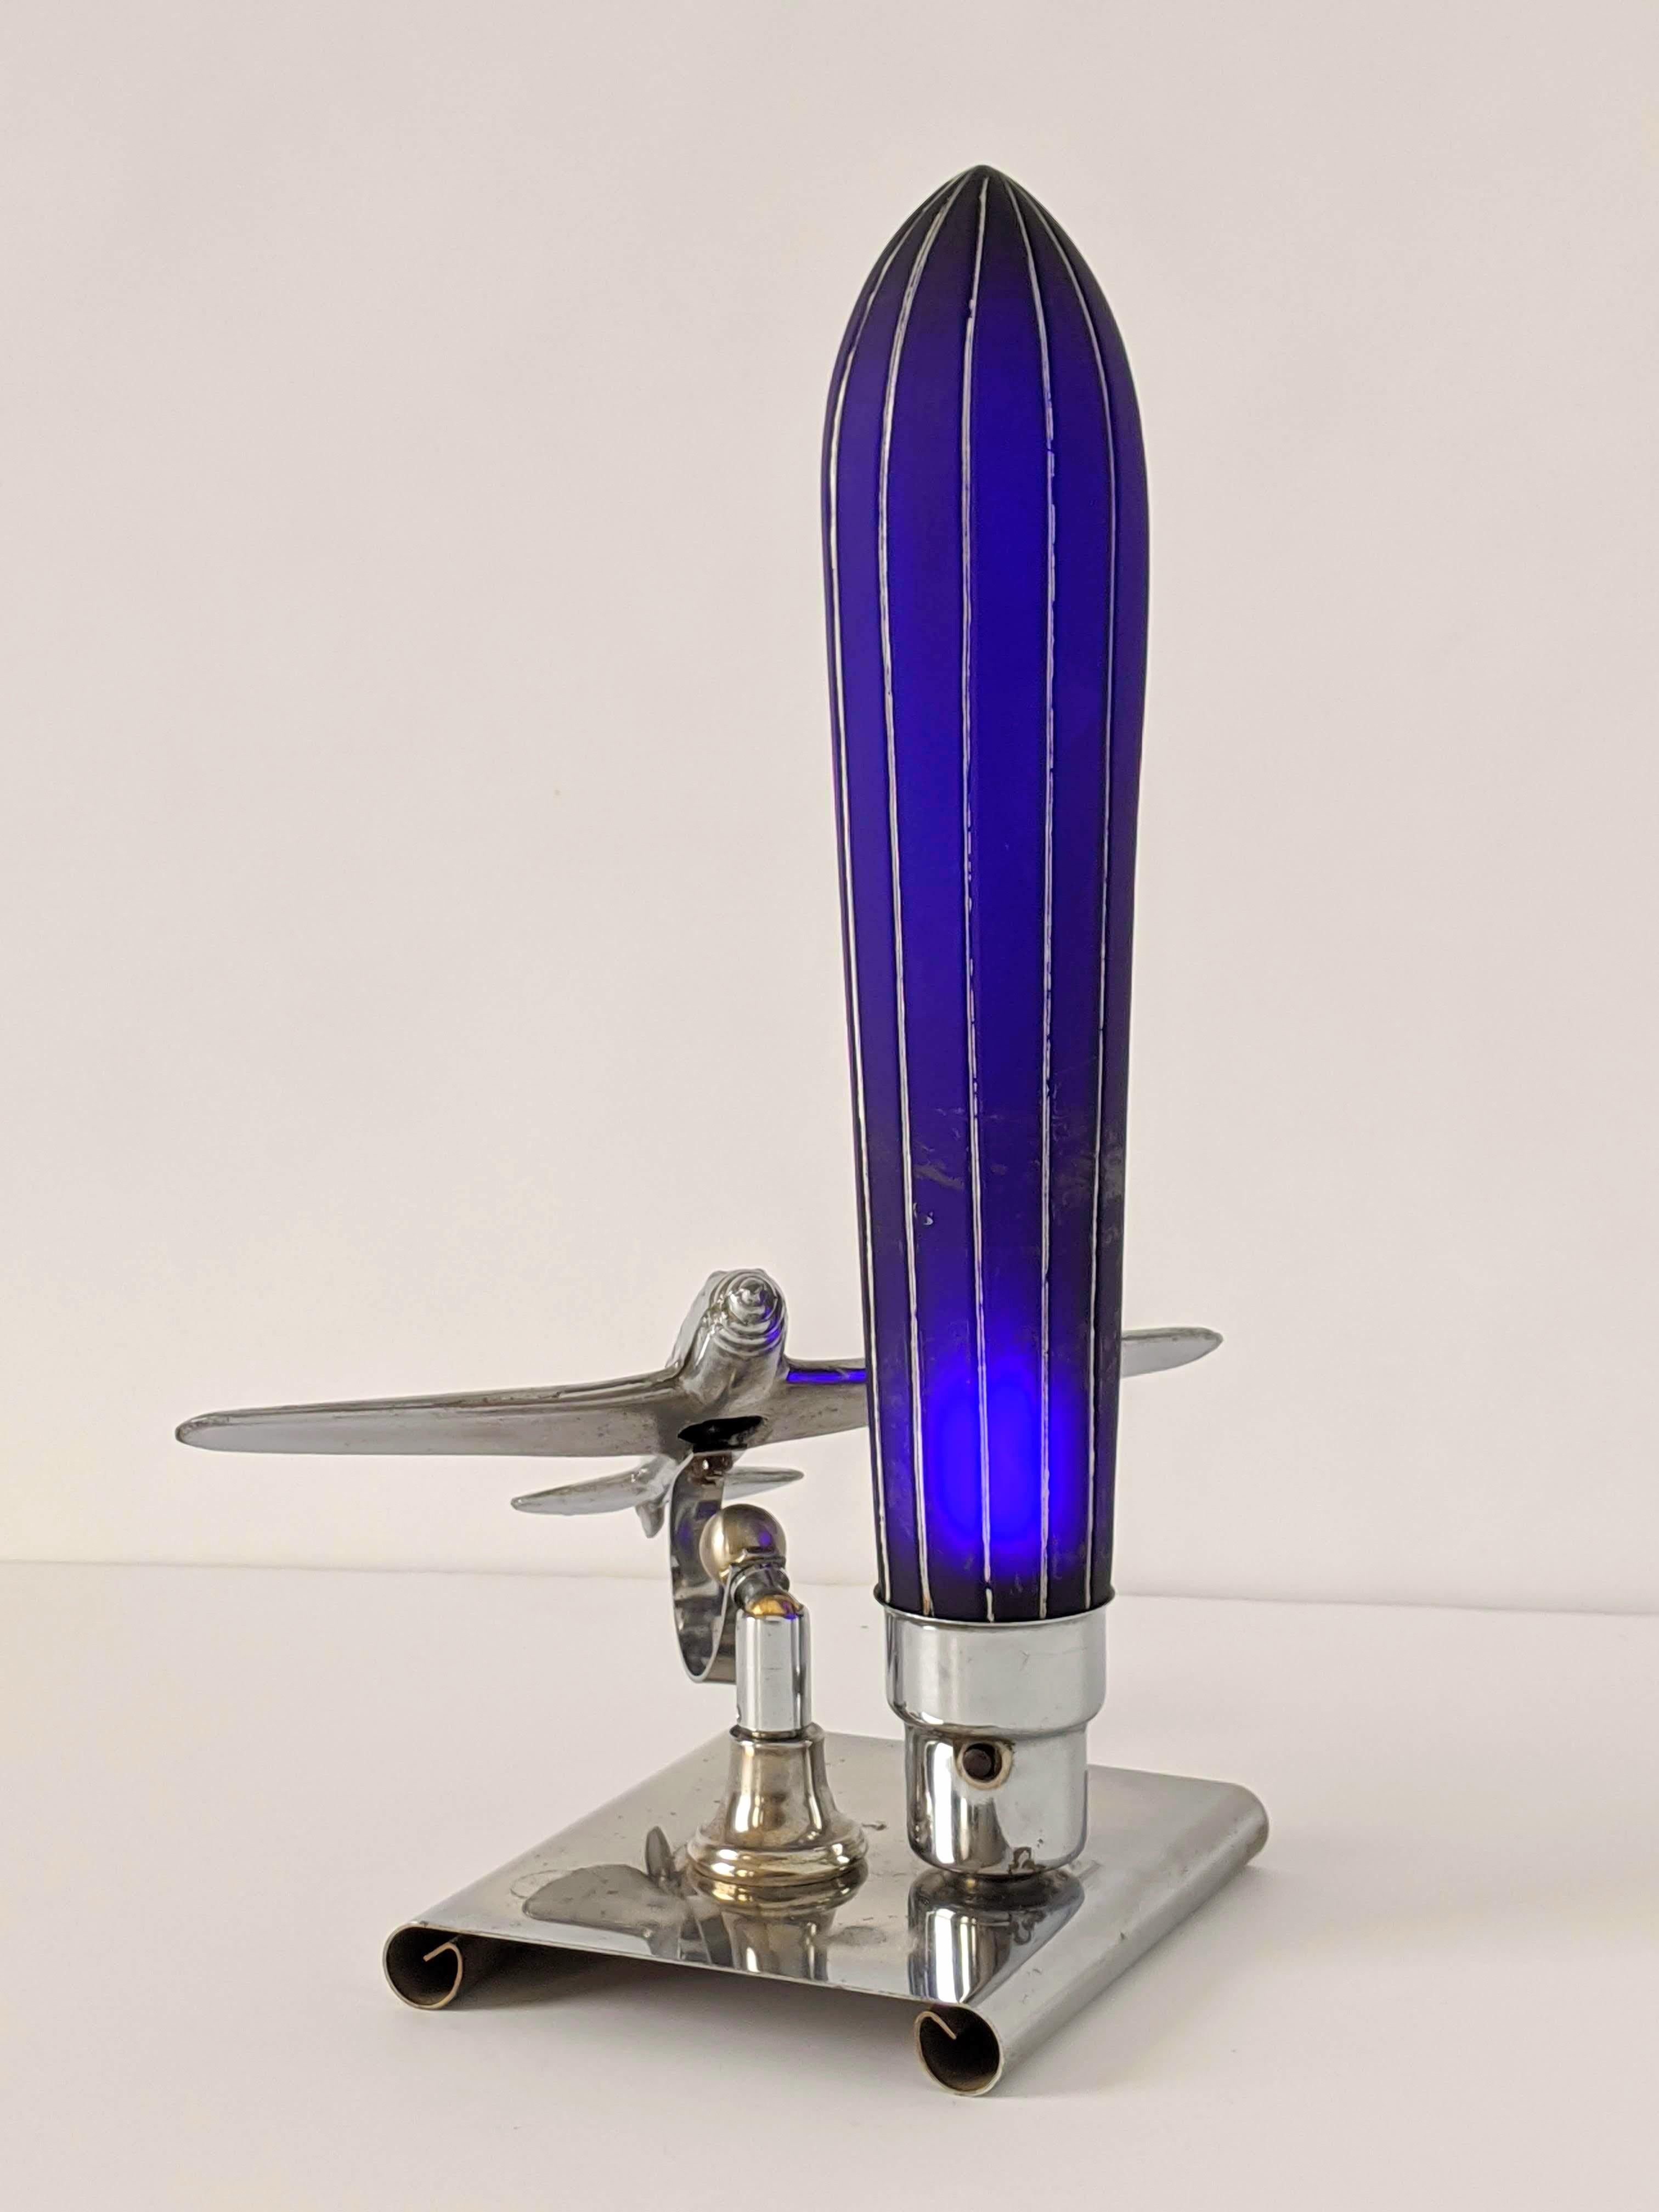 Aviation inspired art deco table lamp by Chicago designer Ray A. Schober. USA patented (Number on shade) in 1938 and 1940. This is a rare survivors with a cobalt blue glass shades with silver painted stripes manufactured by the Premium Products